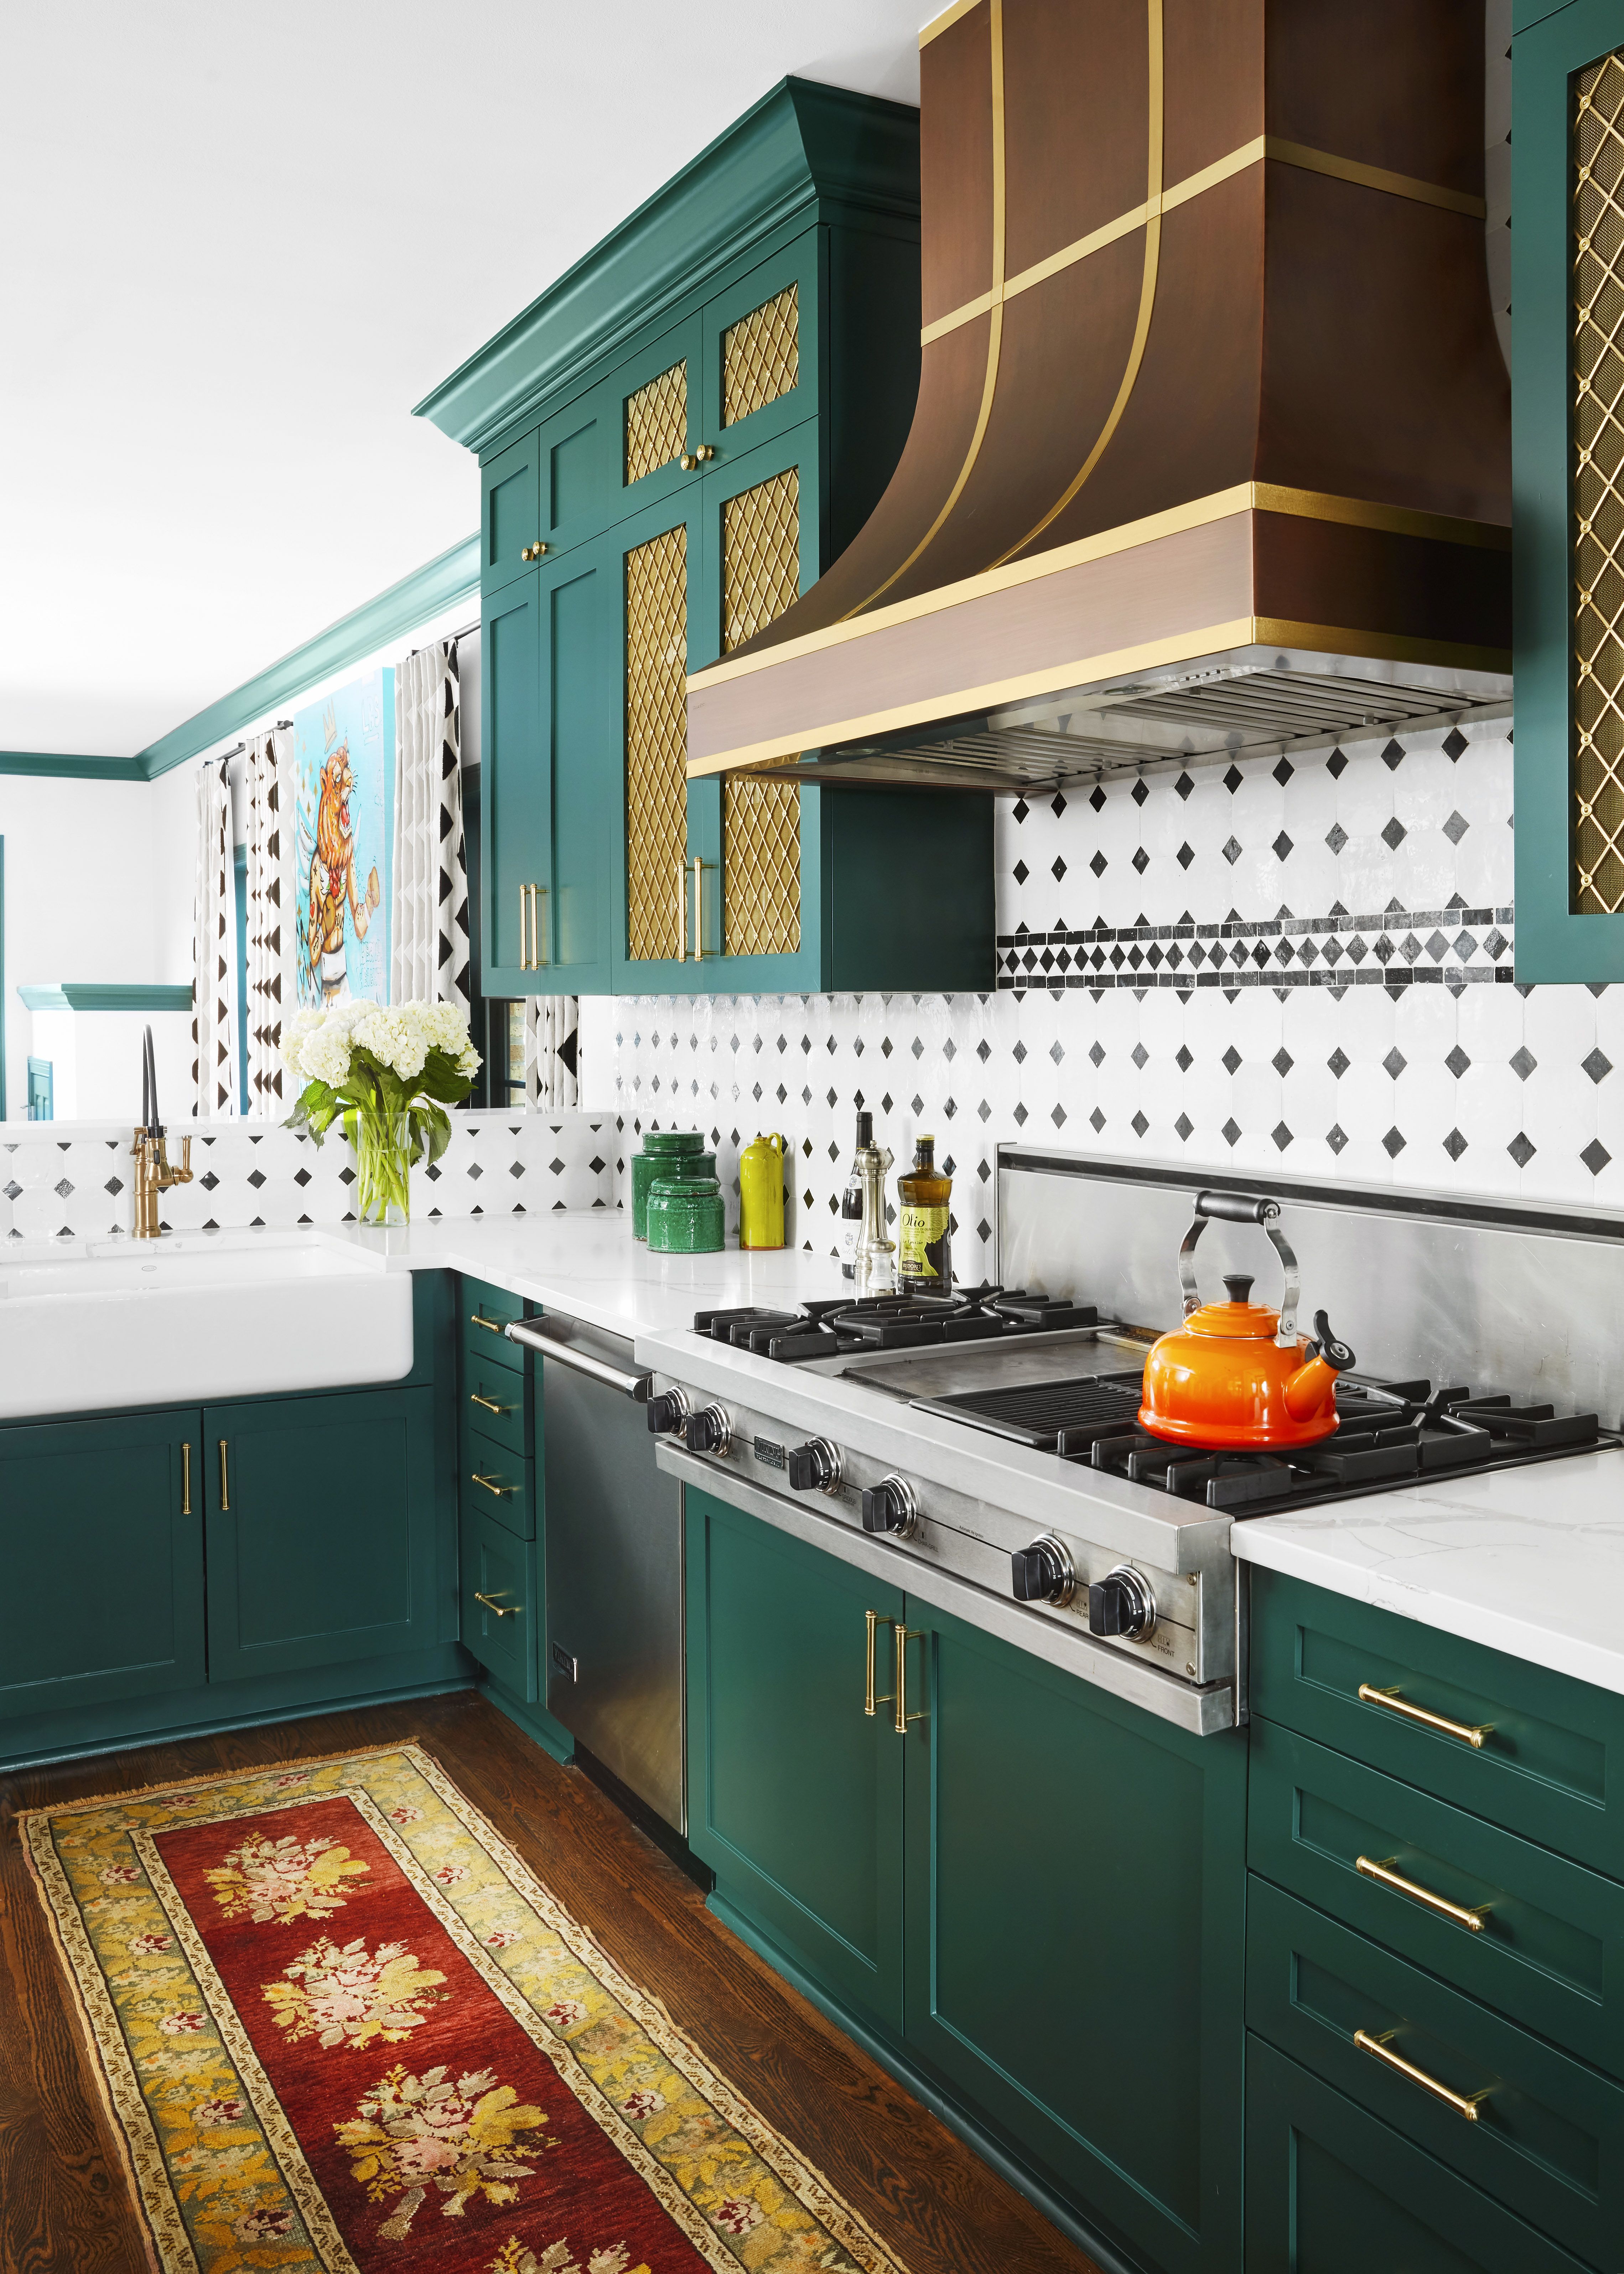 A Chicago Kitchen by SuzAnn Kletzien With Bold Green Cabinets